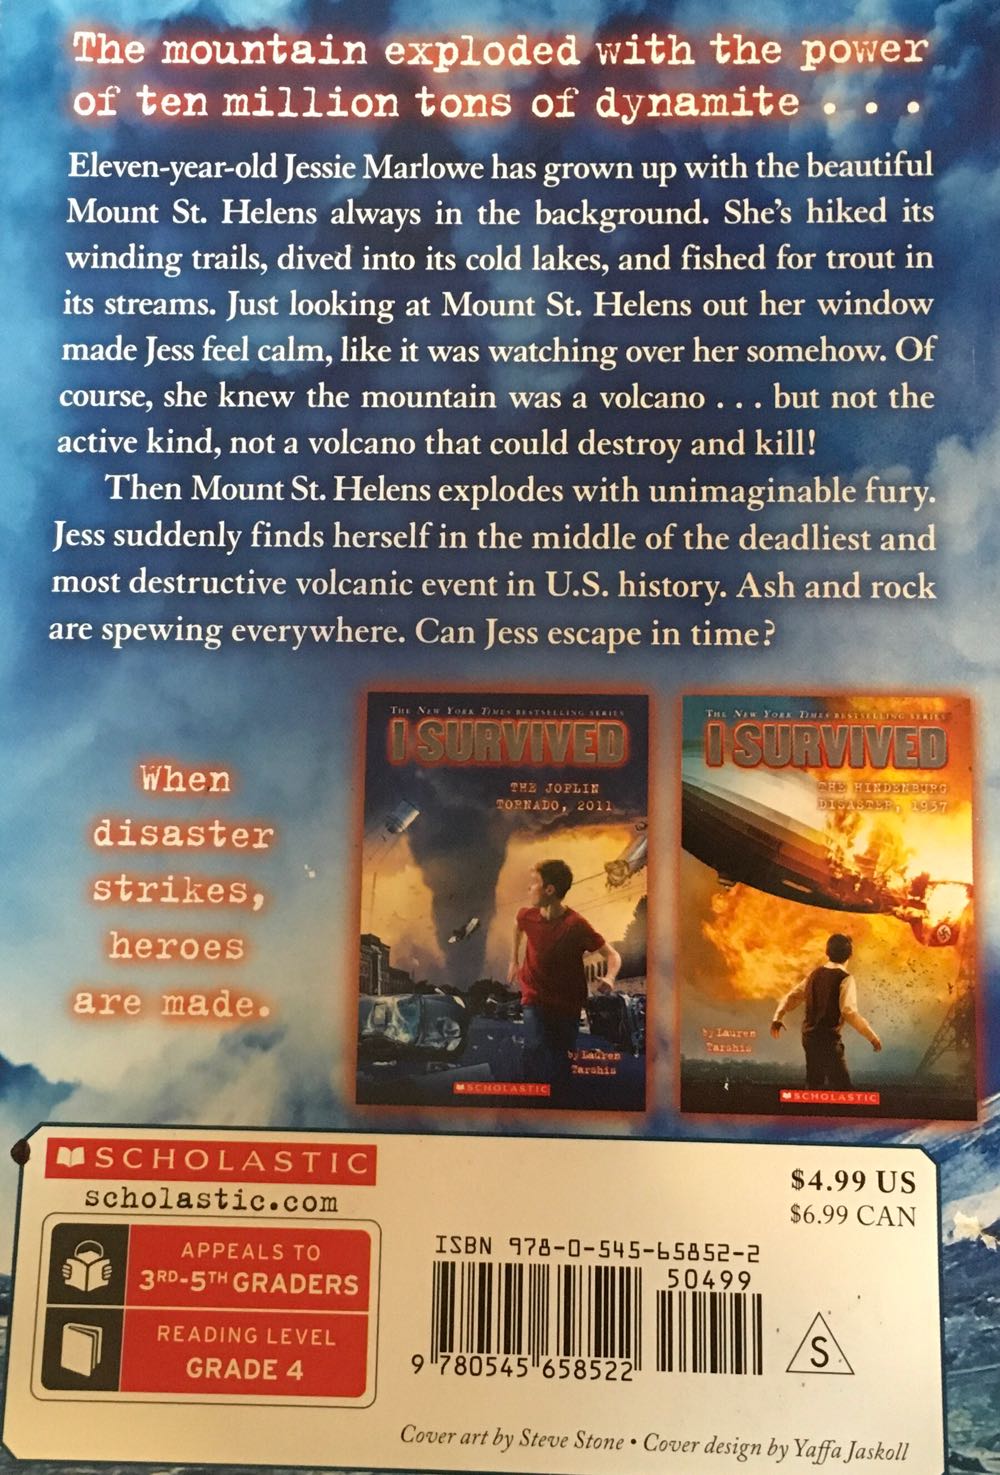 I Survived #14: The Eruption of Mount St. Helens, 1980 - Lauren Tarshis (Scholastic Paperbacks - Paperback) book collectible [Barcode 9780545658522] - Main Image 3